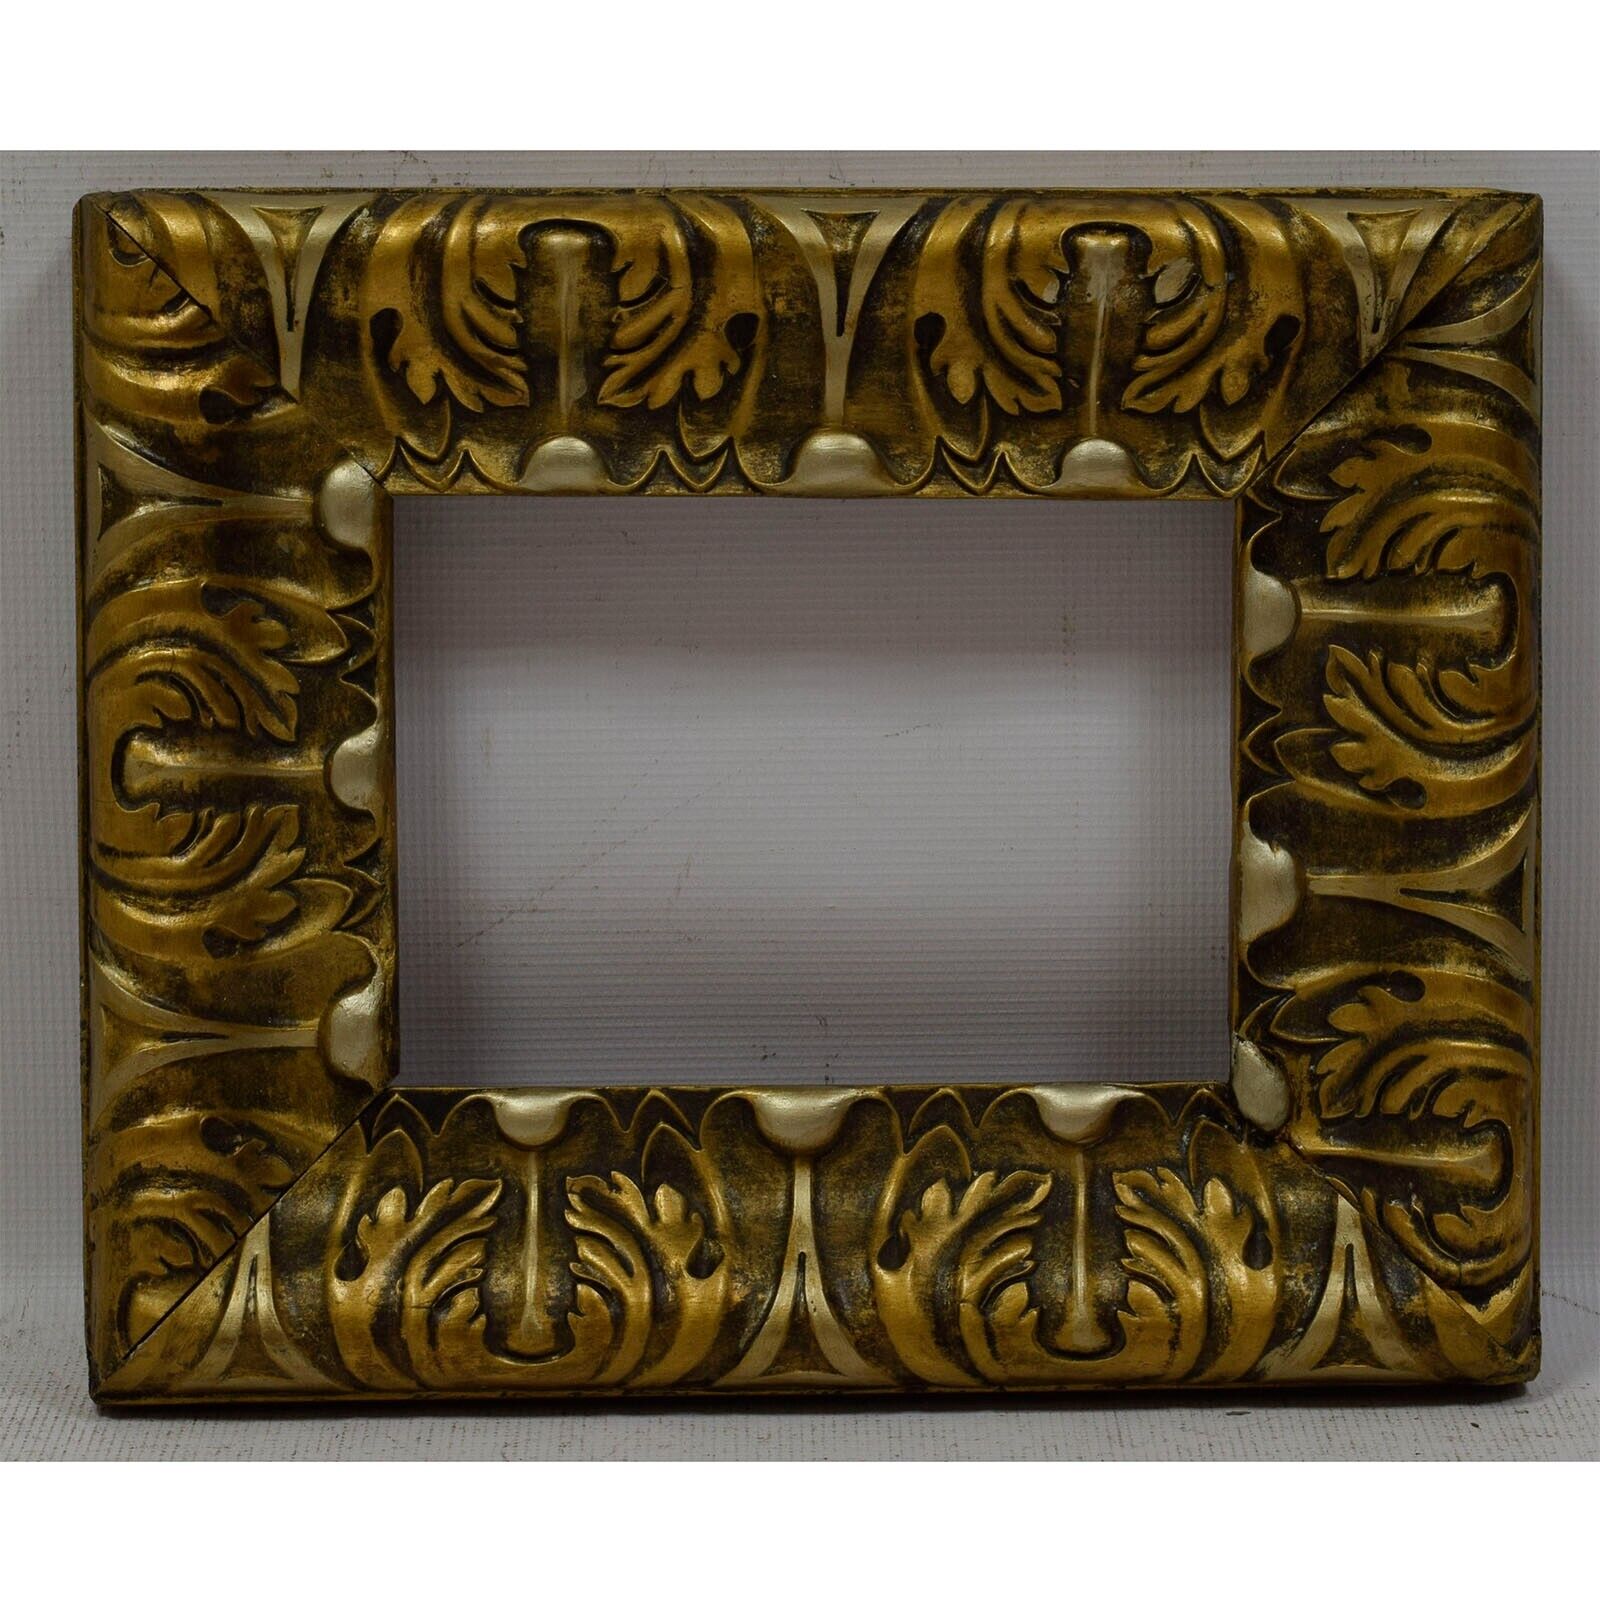 Ca.1850-1900 Old wooden frame decorative Internal: 9x6.4 in